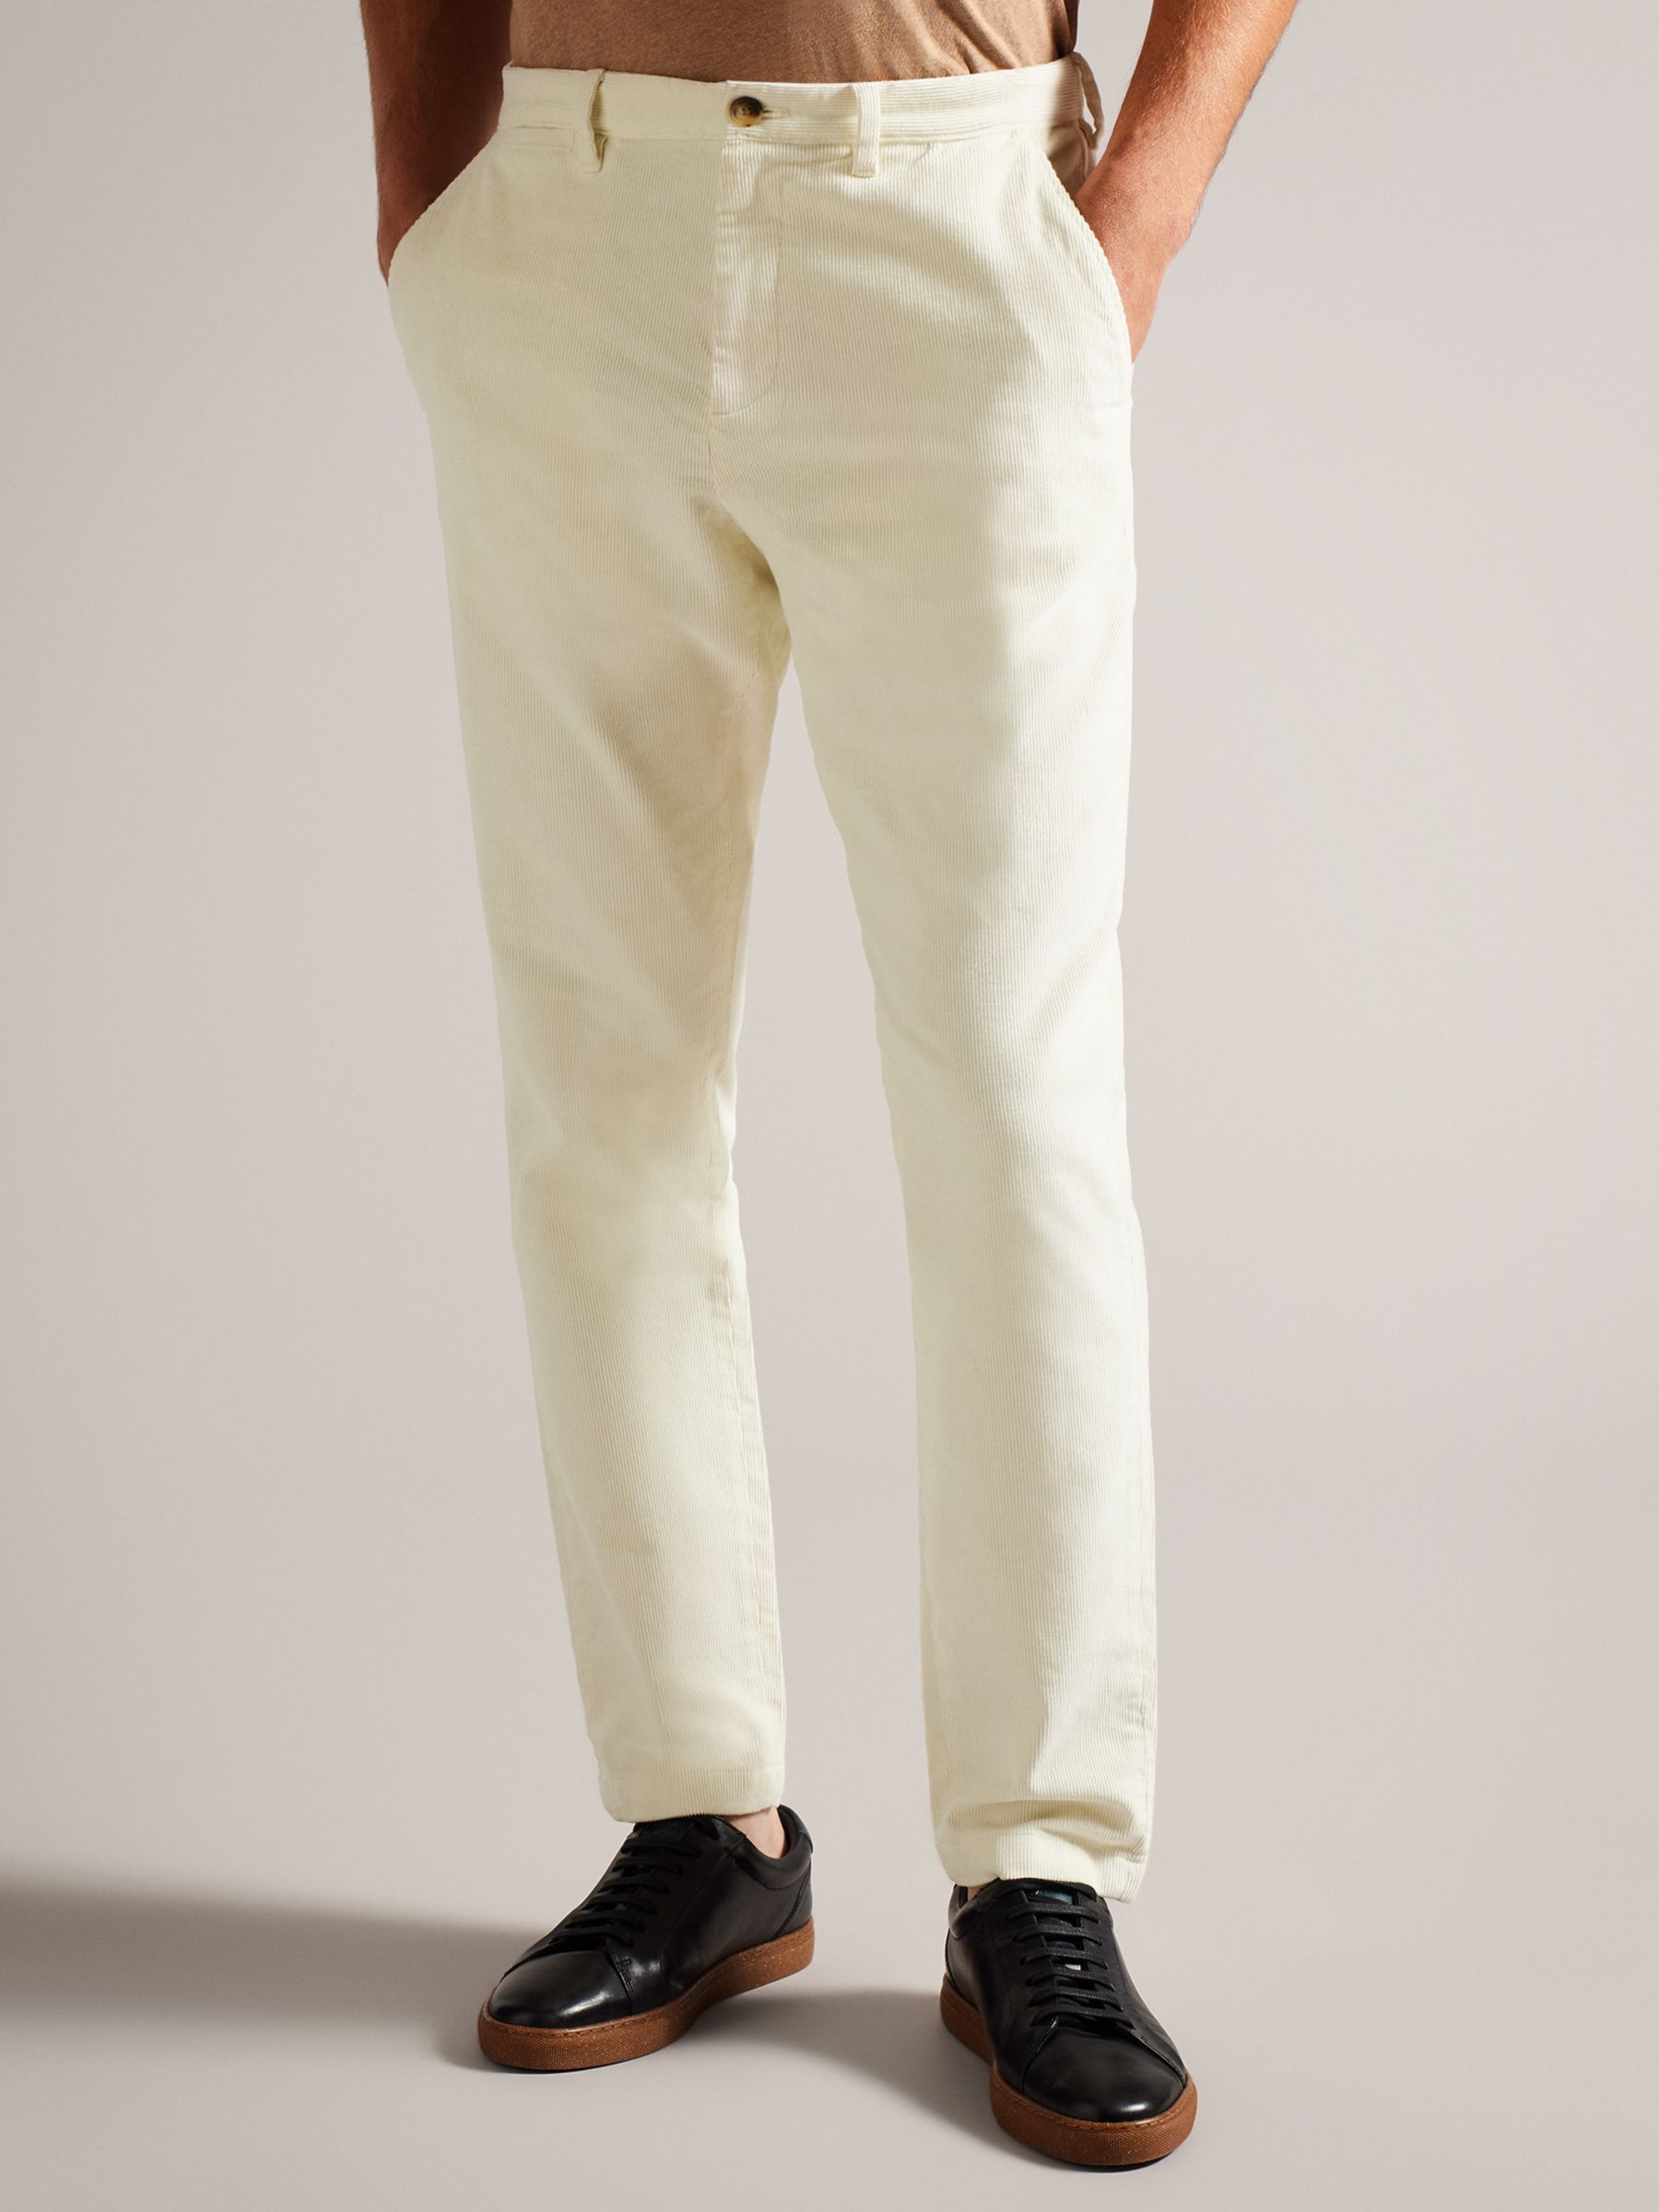 Mens Slim Fit Trousers, Mens Chino & Cord Trousers